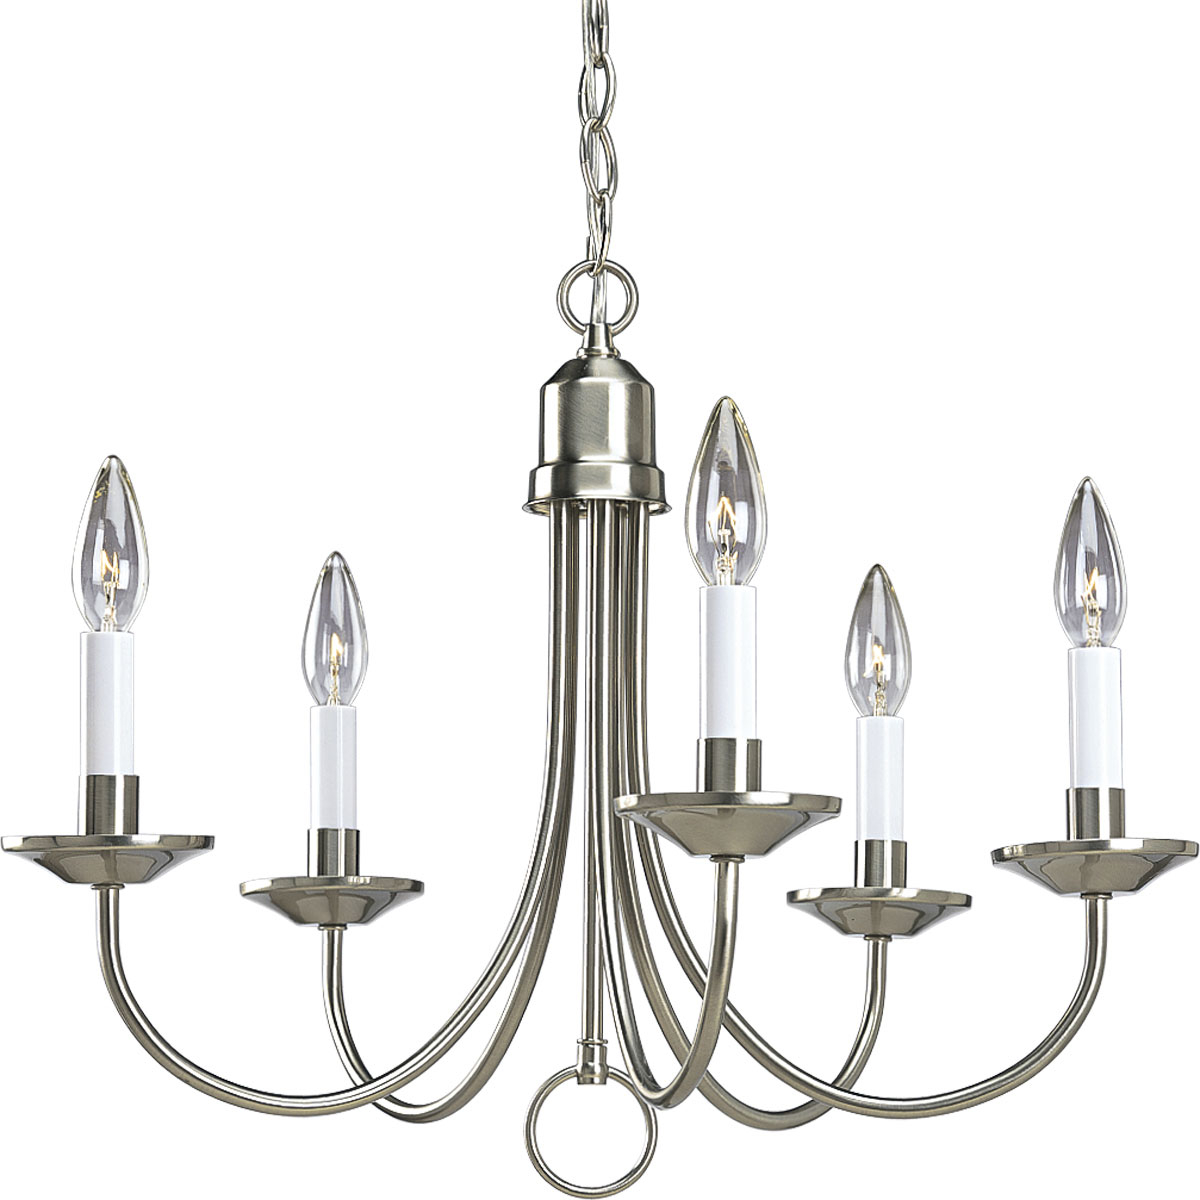 This simple, classic five-light chandelier is popular in the vintage farmhouse inspired designs. White candle covers and a decorative loop detail complete the look. Brushed Nickel finish.